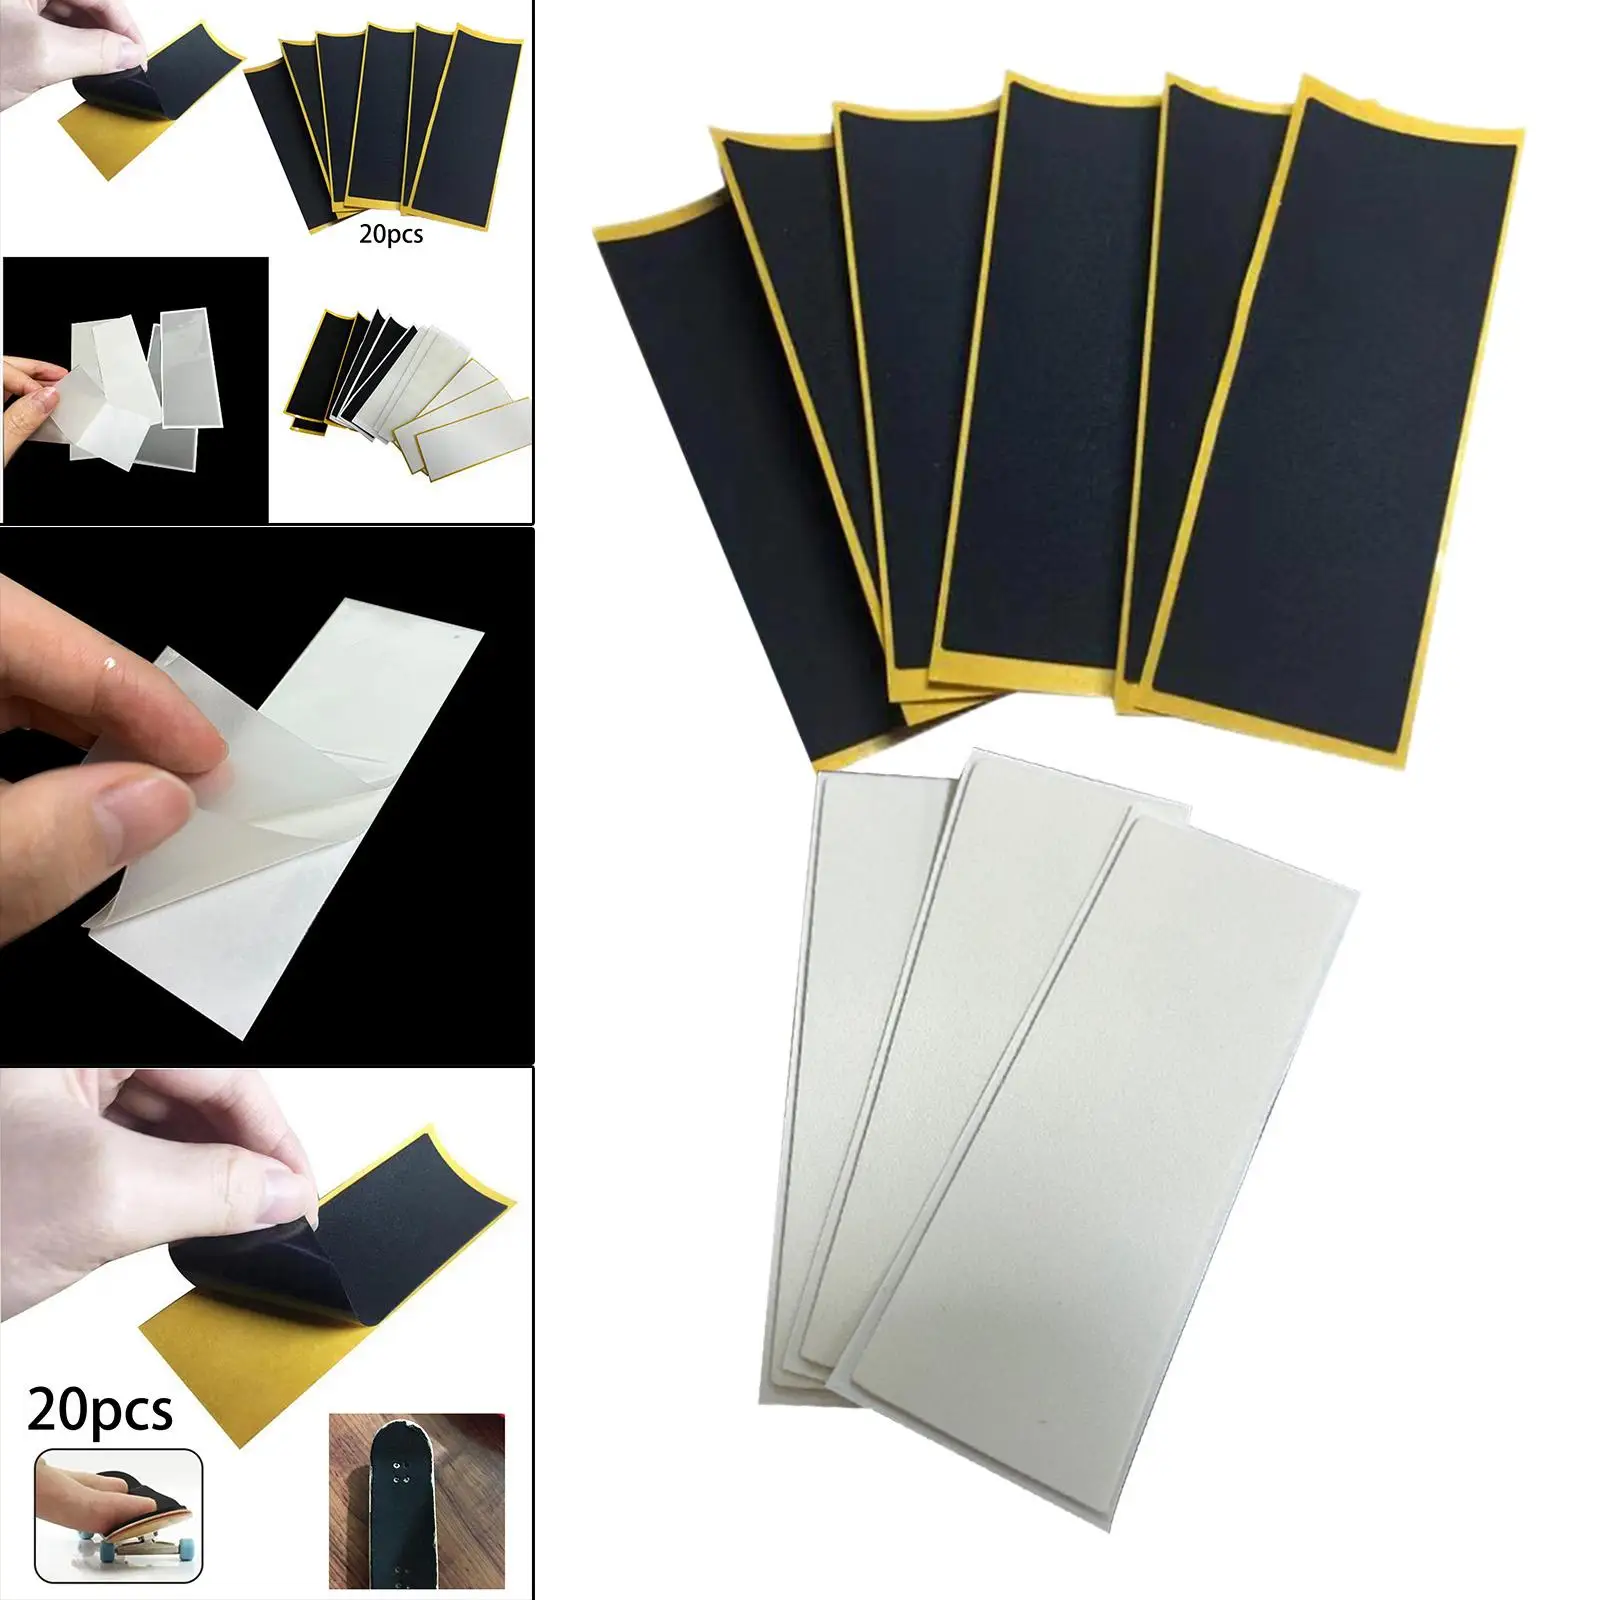 20 Pieces Fingerboard Deck Tape Adhesive Non Slip 11x3.8cm Skateboard Foam Tape Stickers for Fingerboards Accessories